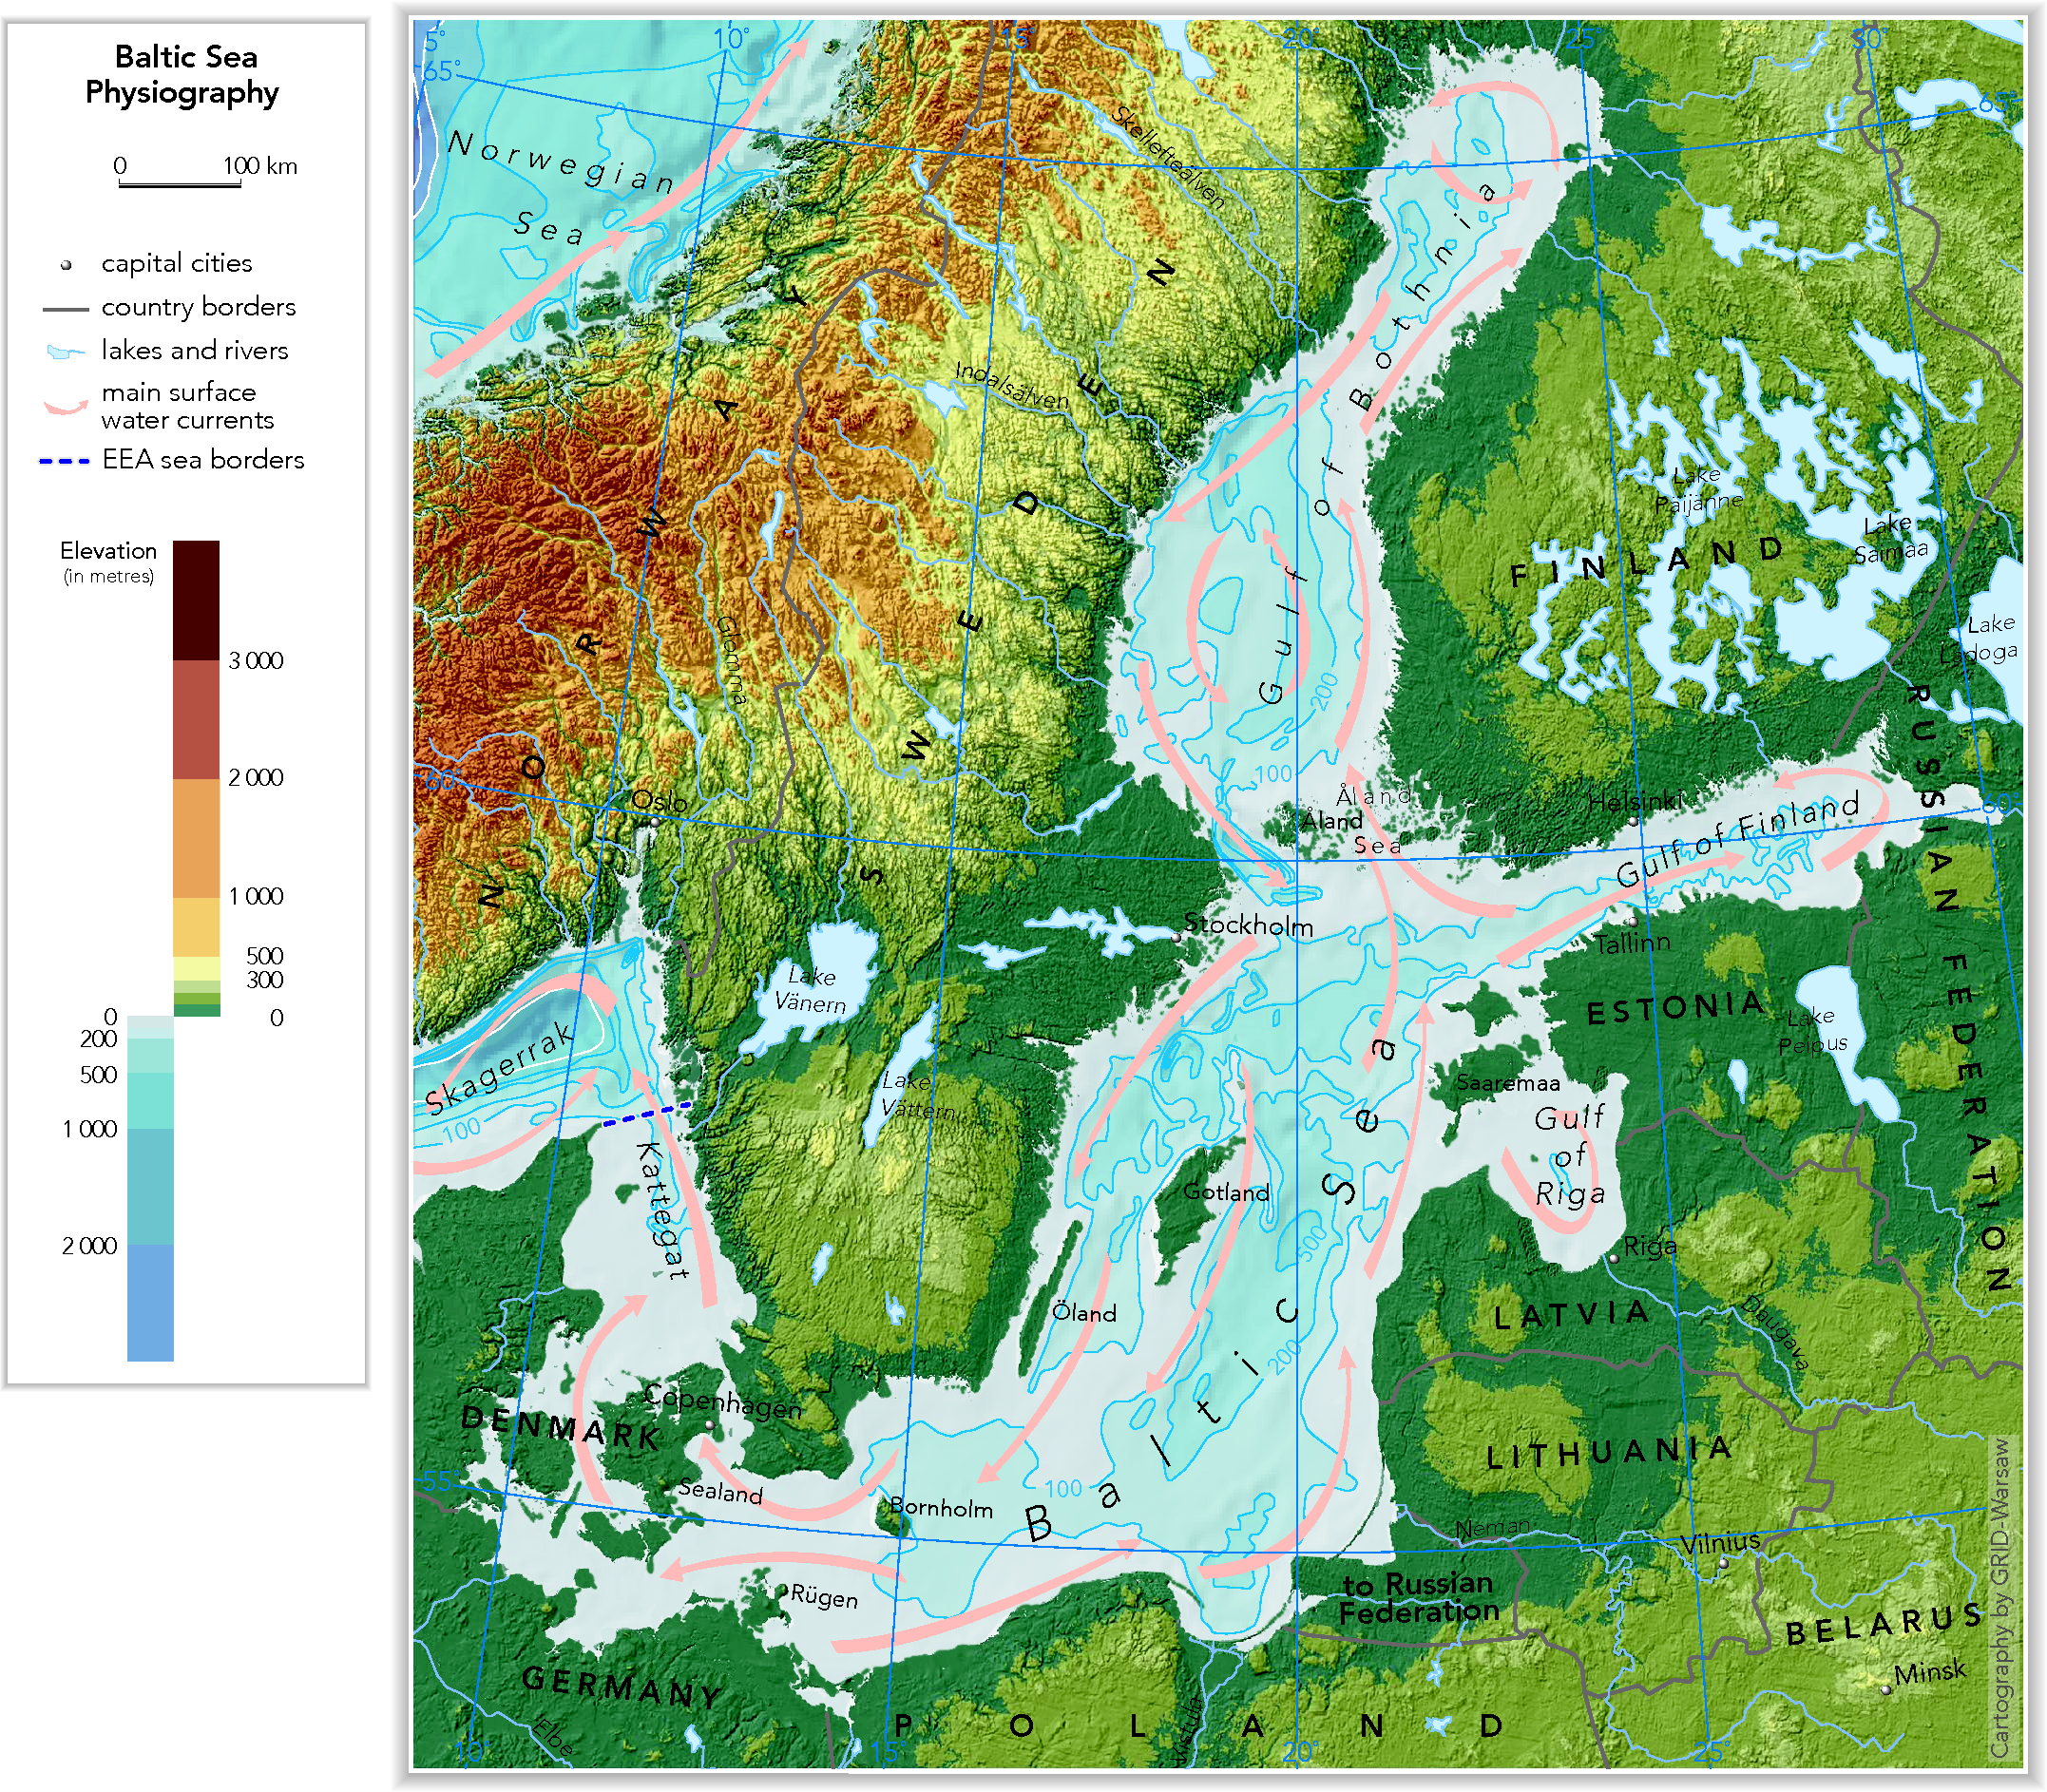 Baltic Sea Physiography Depth Distribution And Main Currents